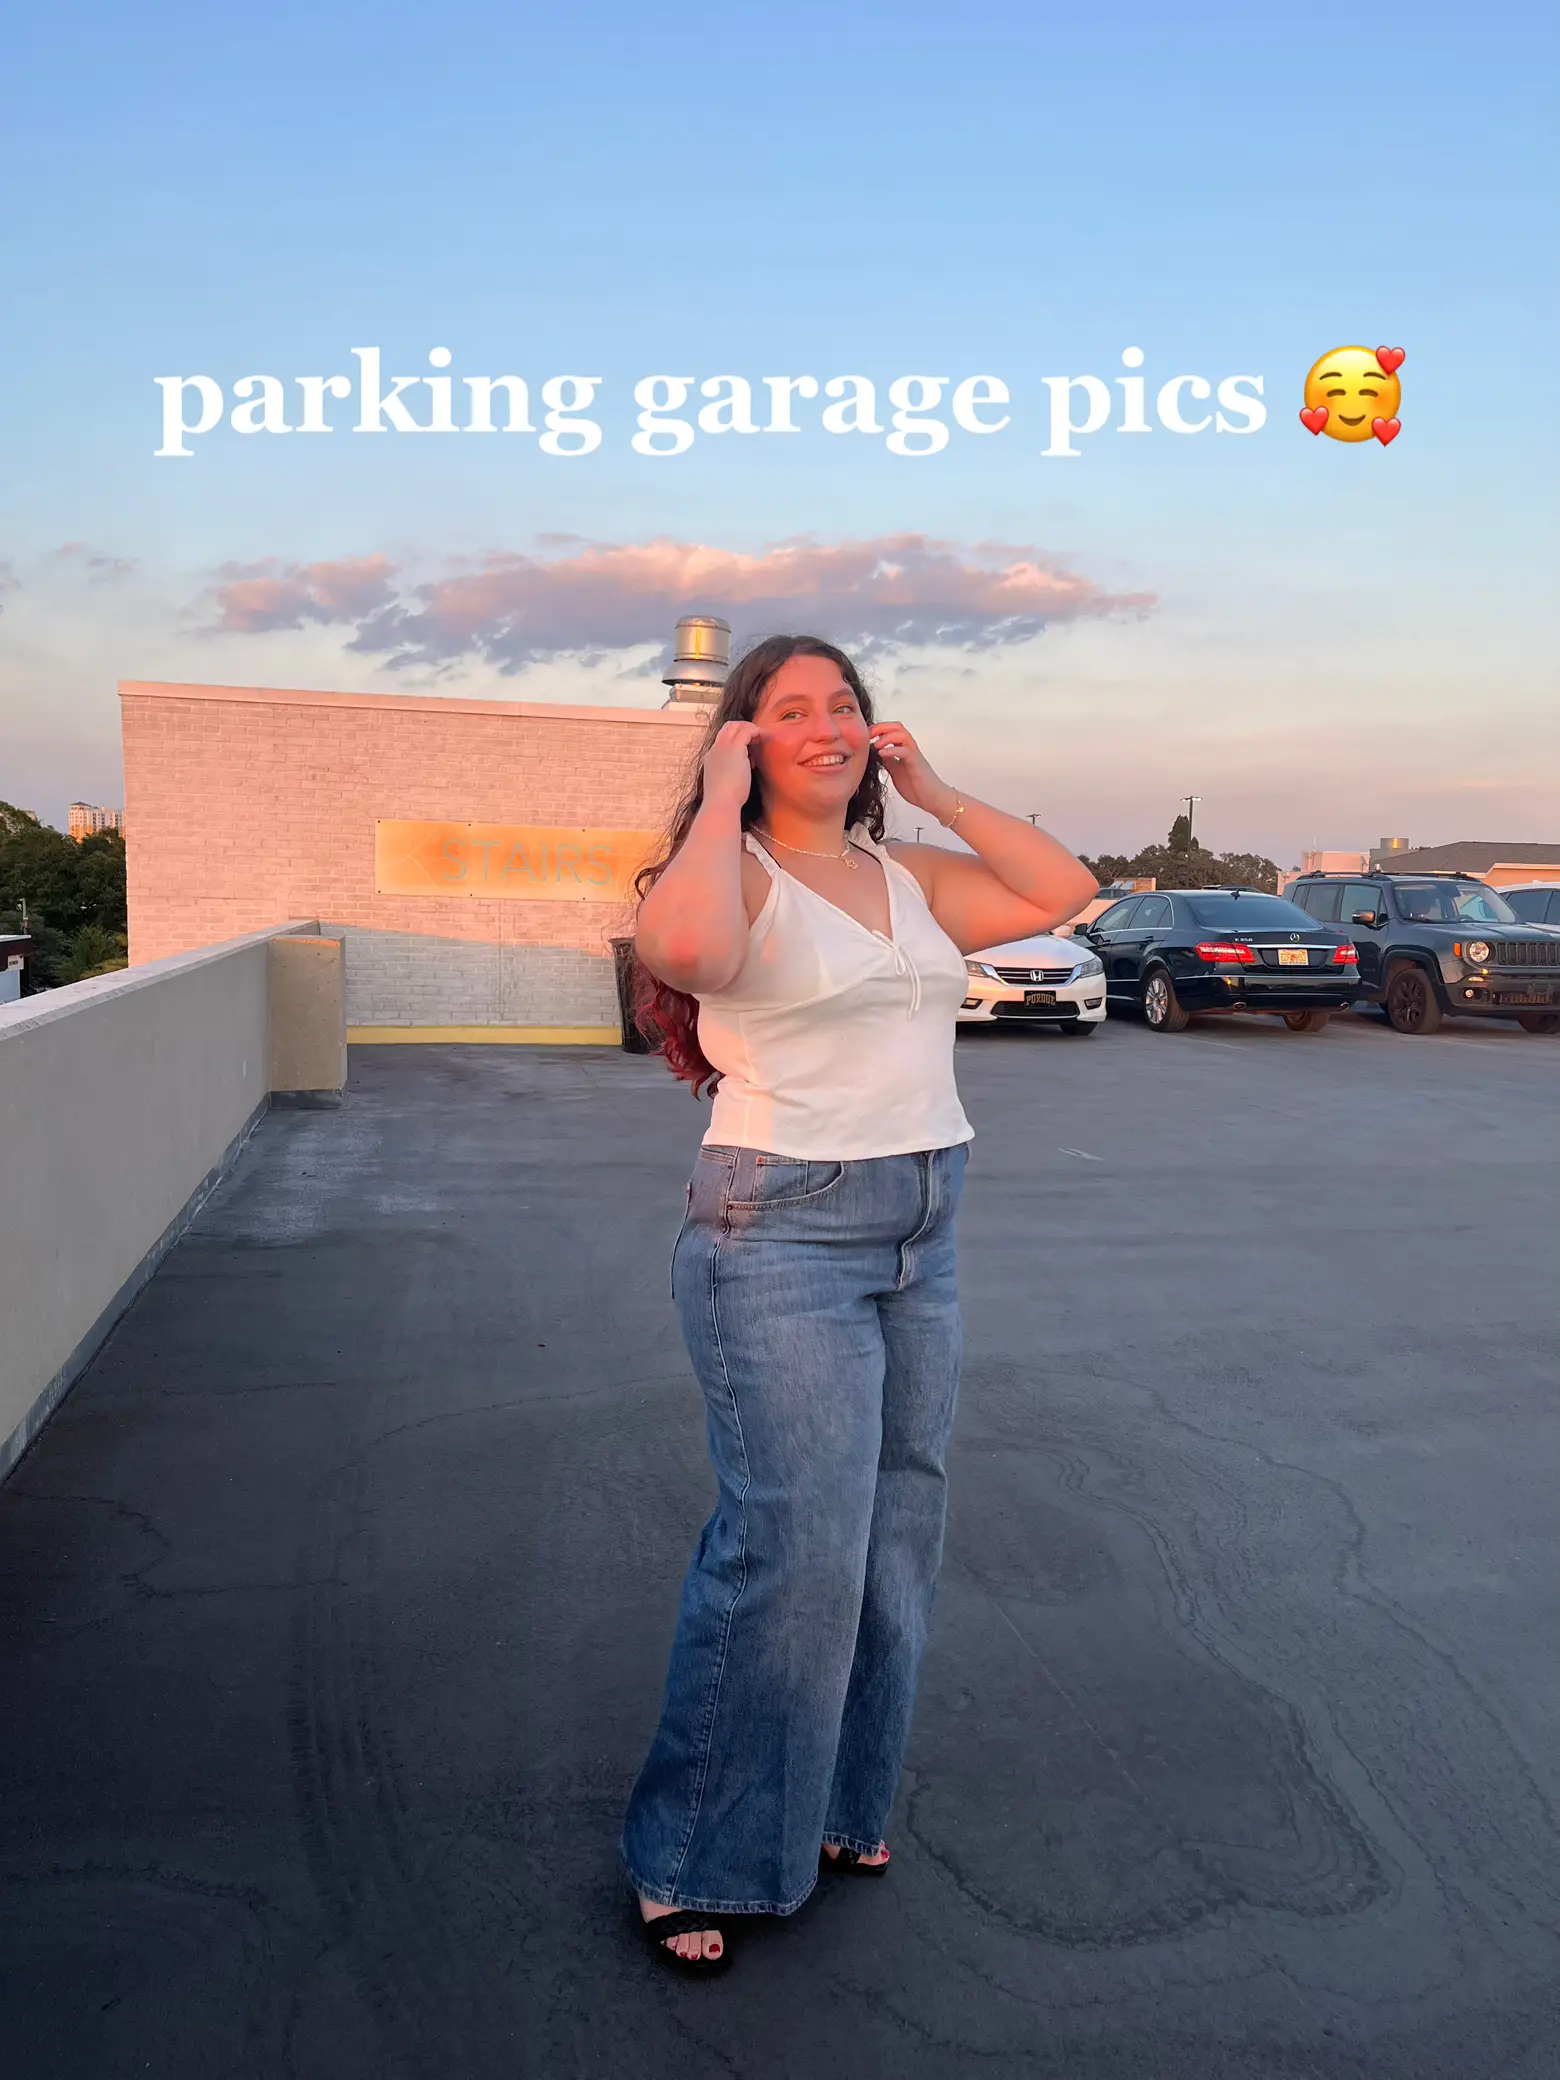 butch stanton add captions for parking garage pictures photo